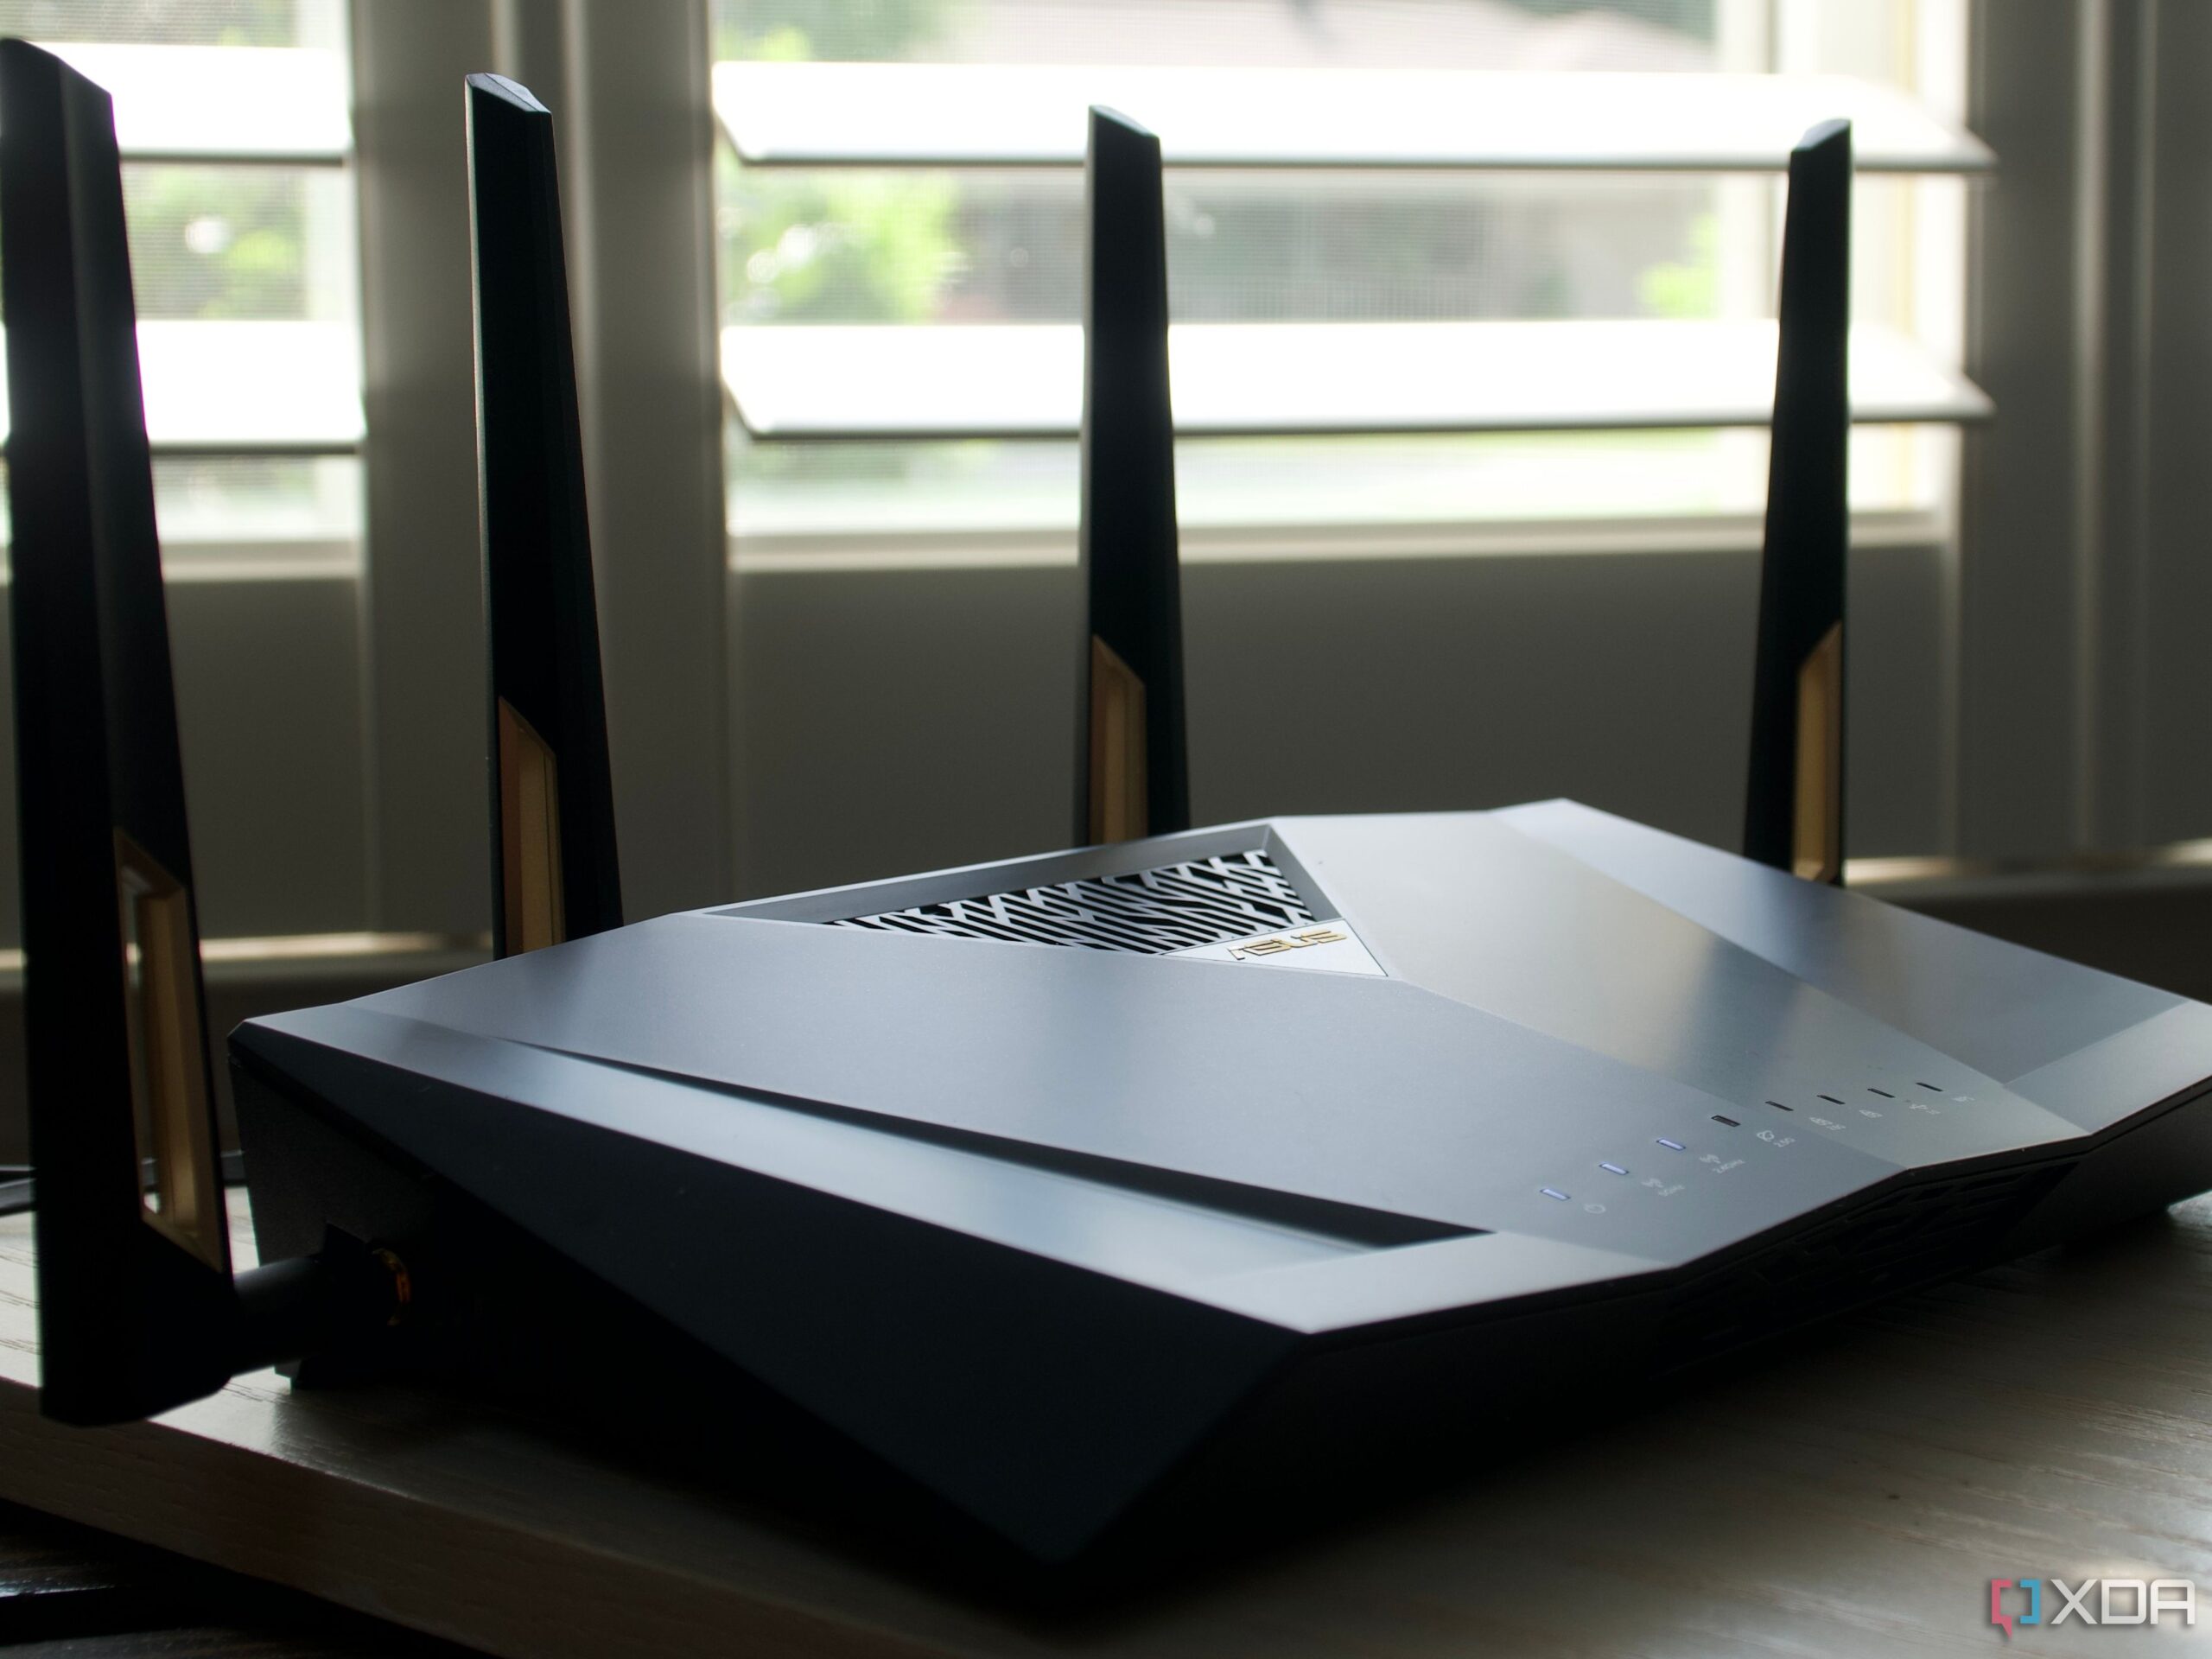 Asus RT-AX88U Pro review: A powerful gaming router that can handle almost anything else